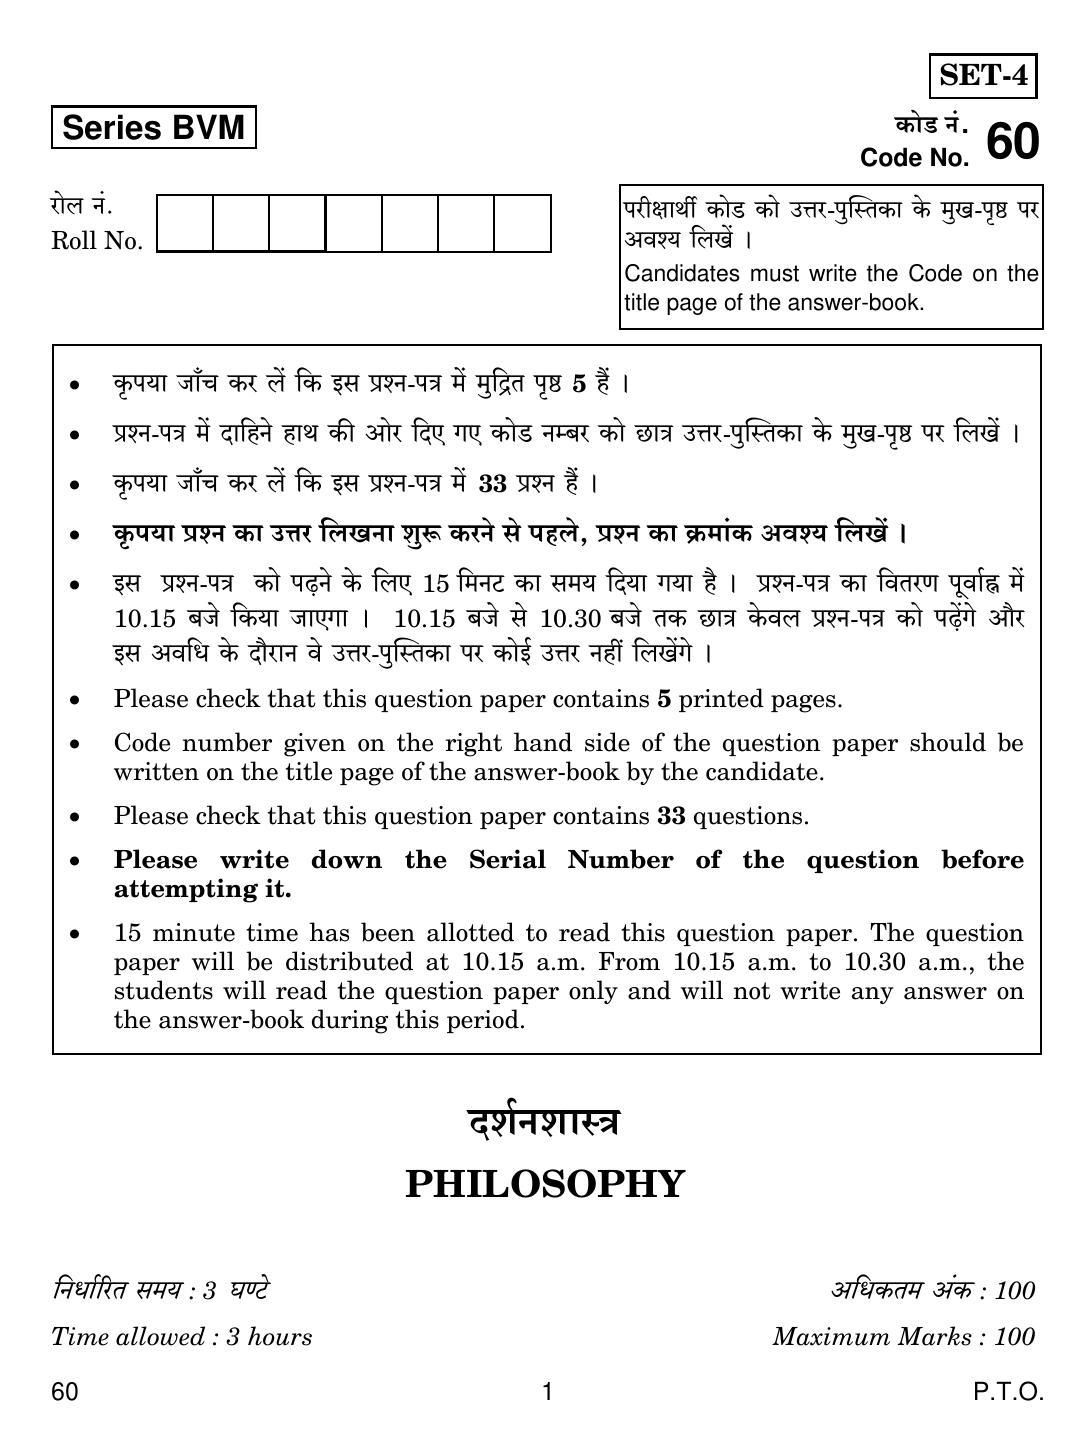 CBSE Class 12 60 Philosophy 2019 Question Paper - Page 1